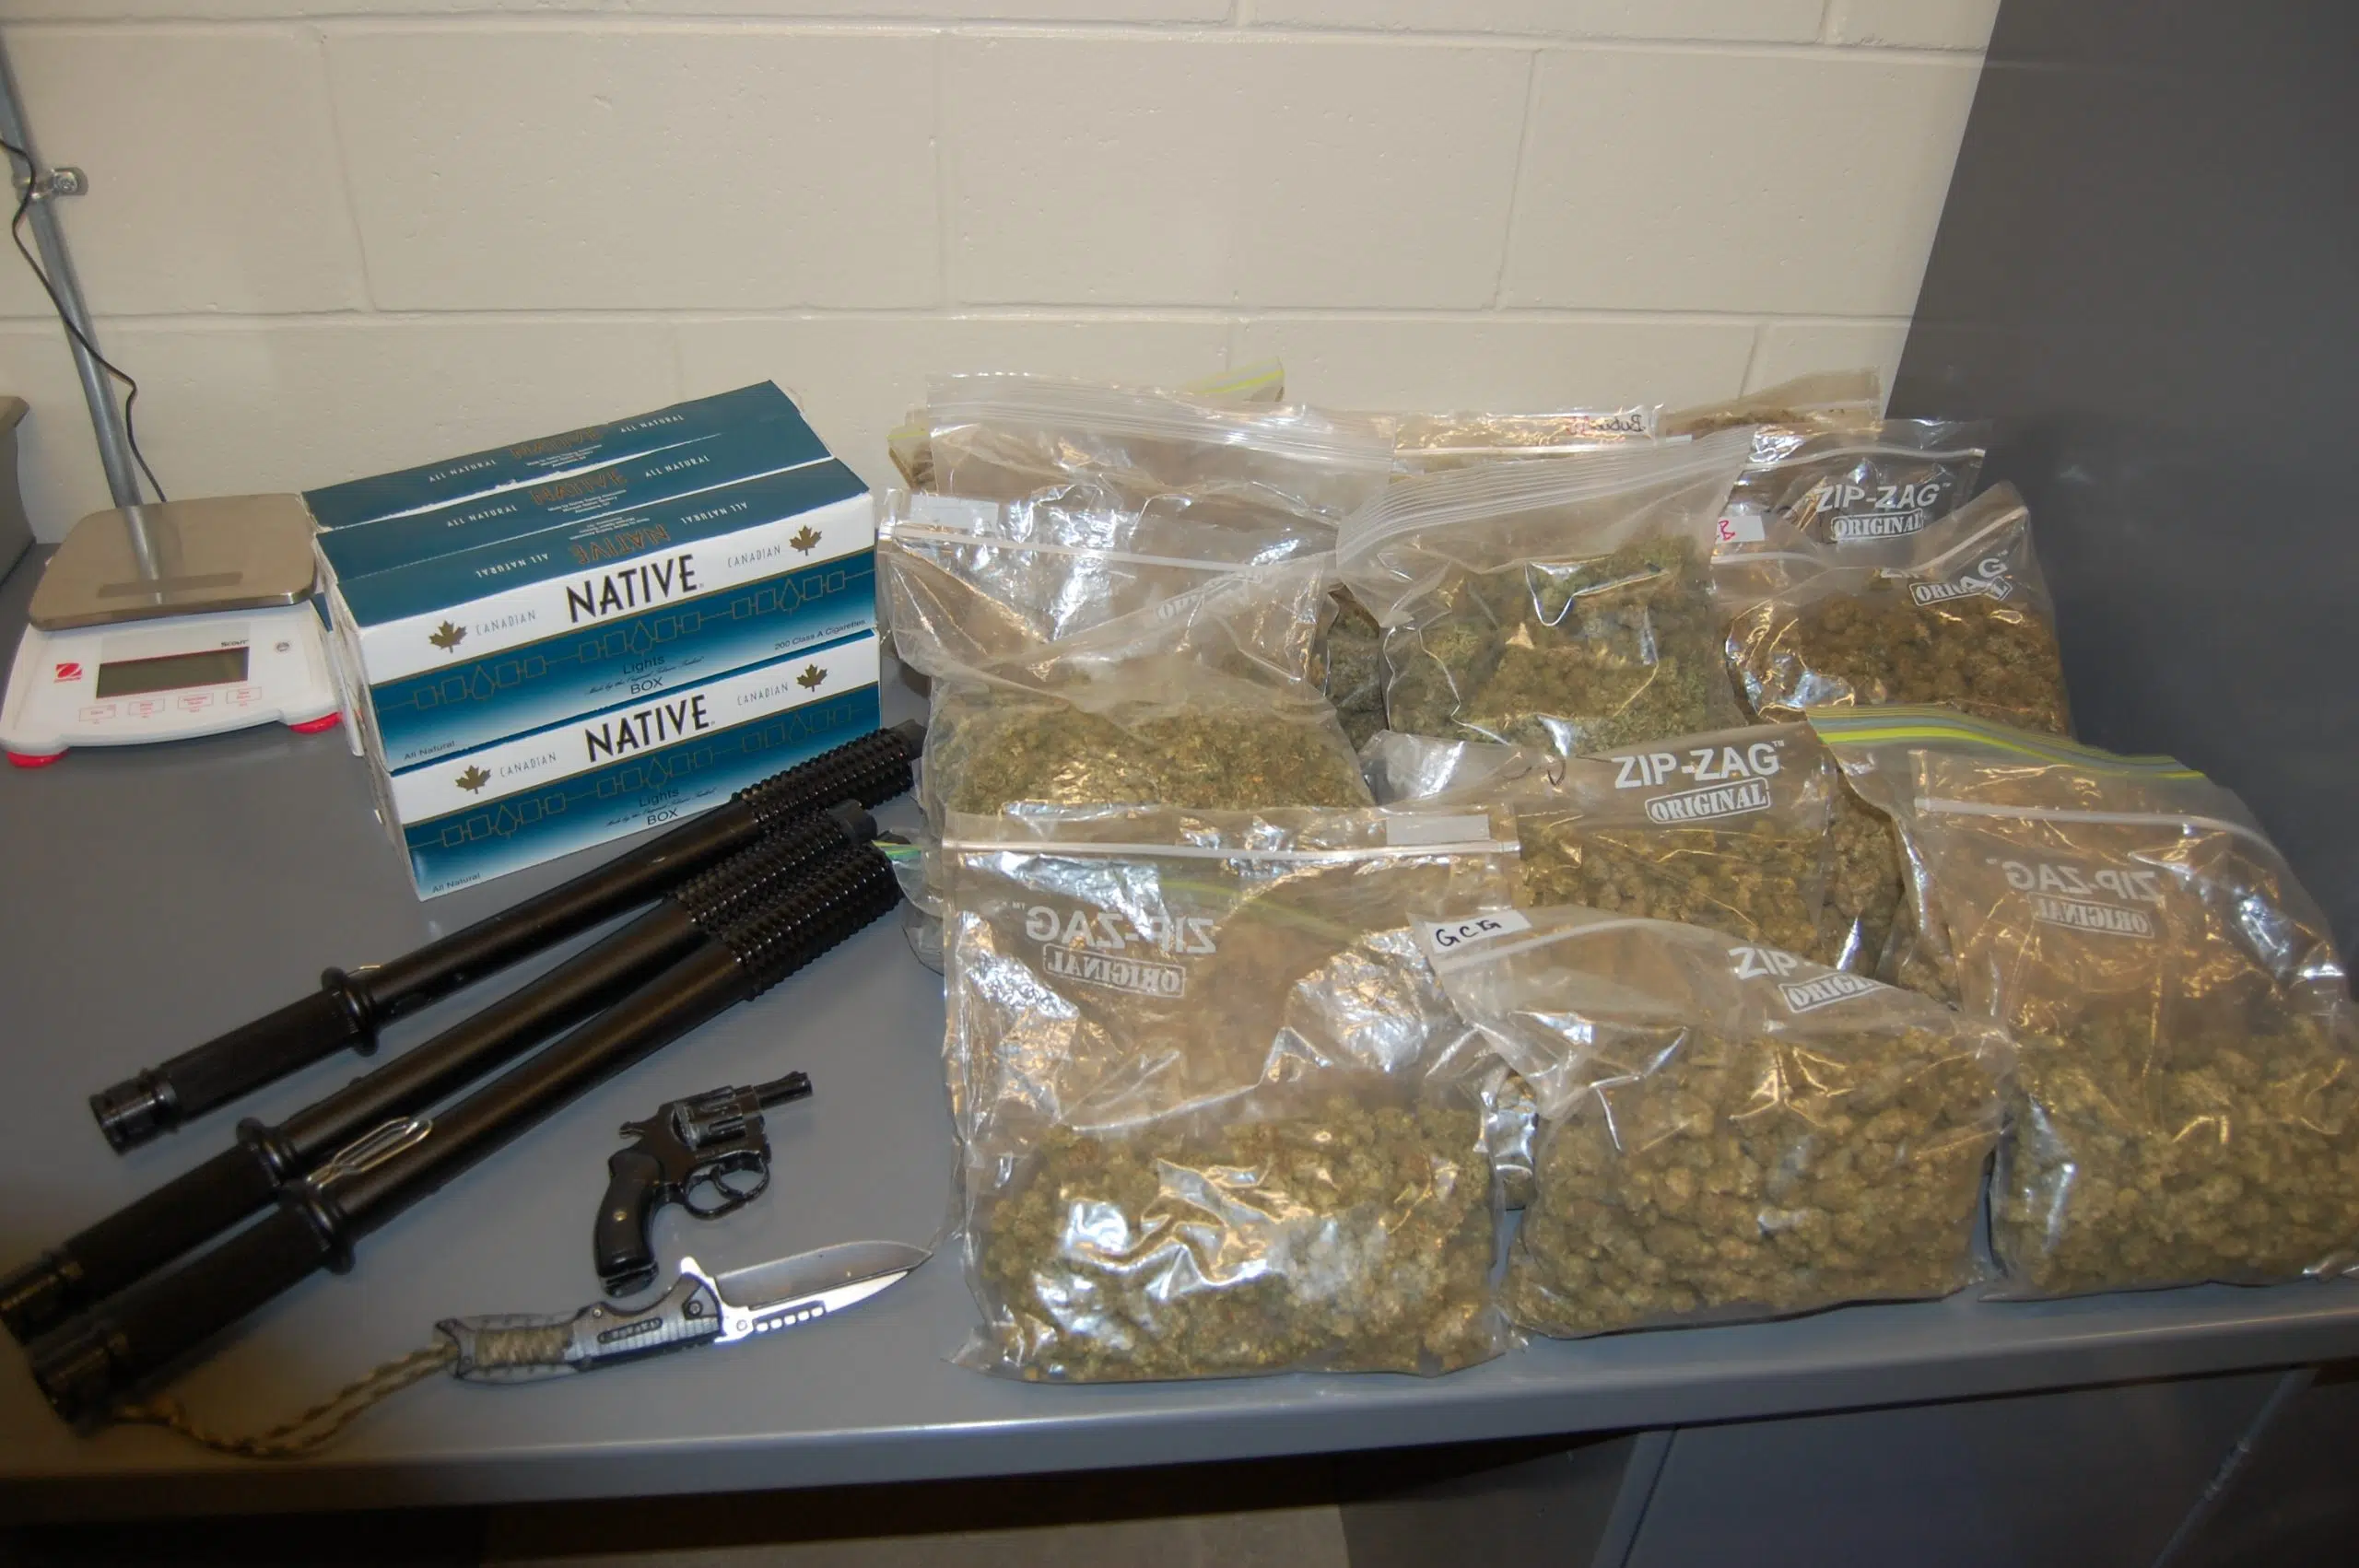 Traffic stop leads to big haul for Revelstoke RCMP